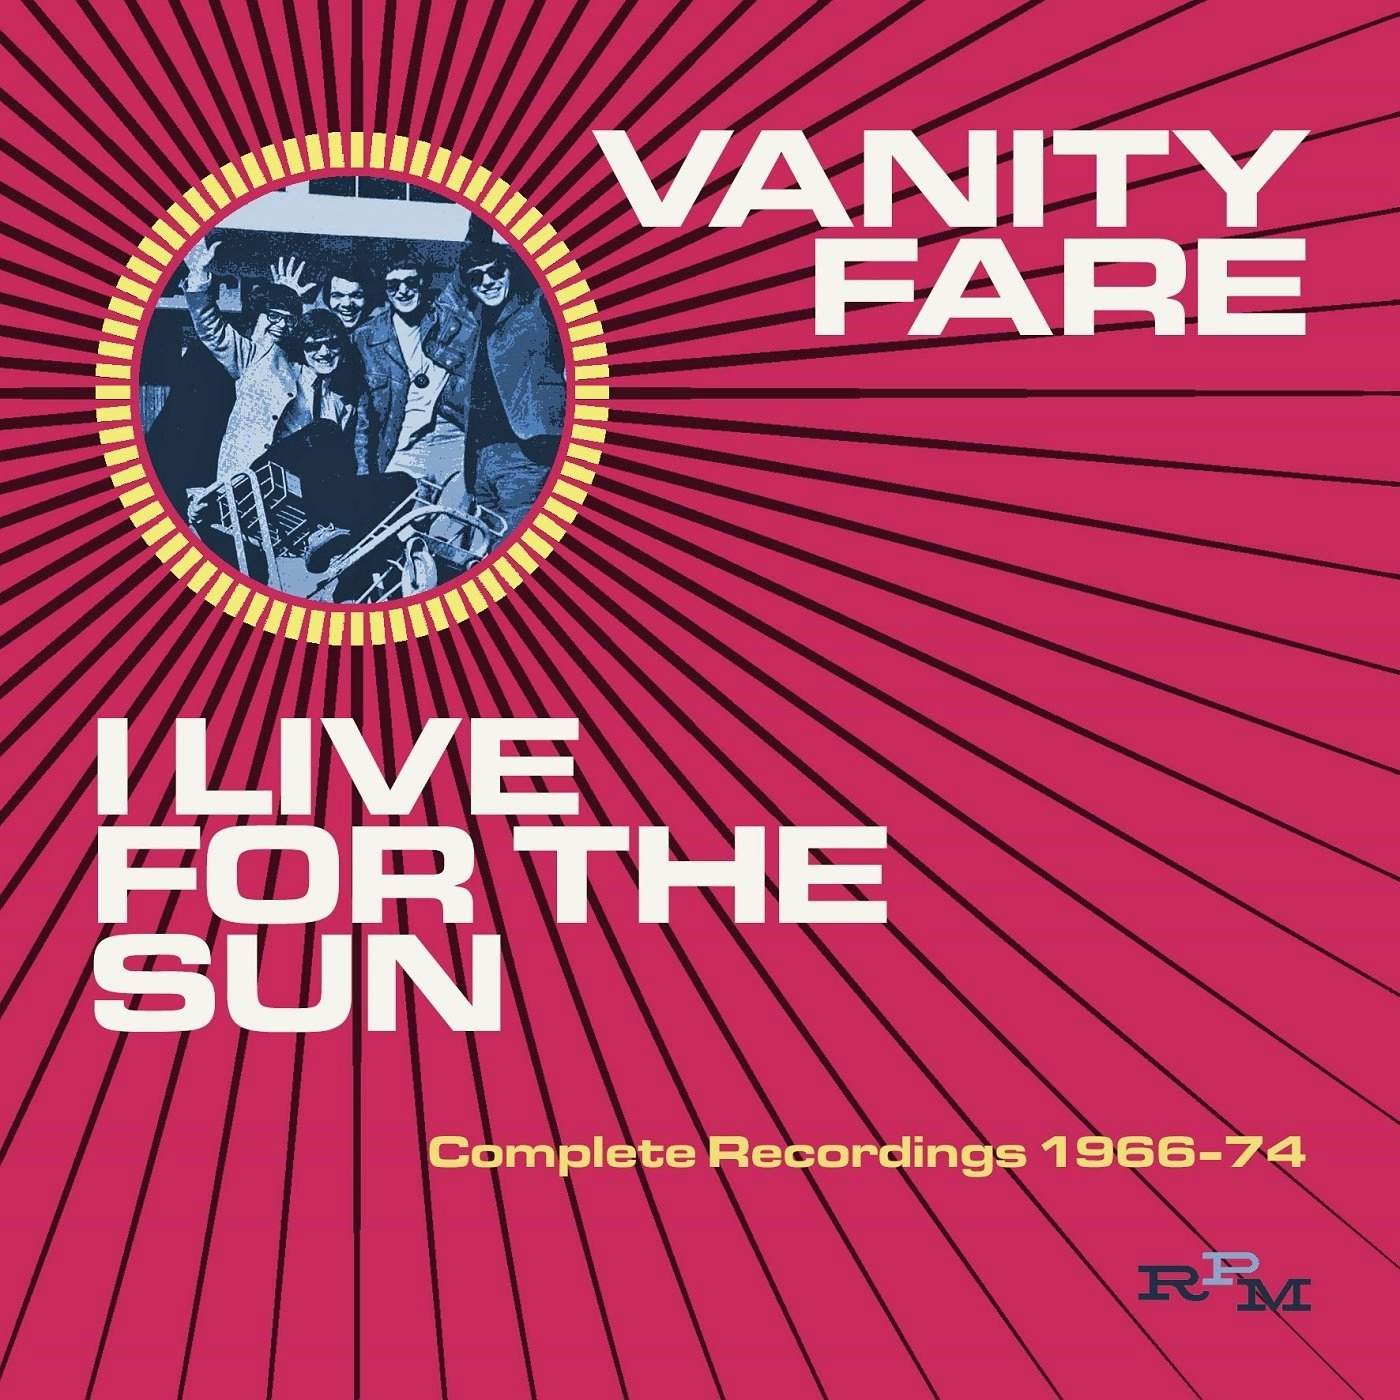 Vanity Fare I LIVE FOR THE SUN: COMPLETE RECORDINGS 1968-74 CD